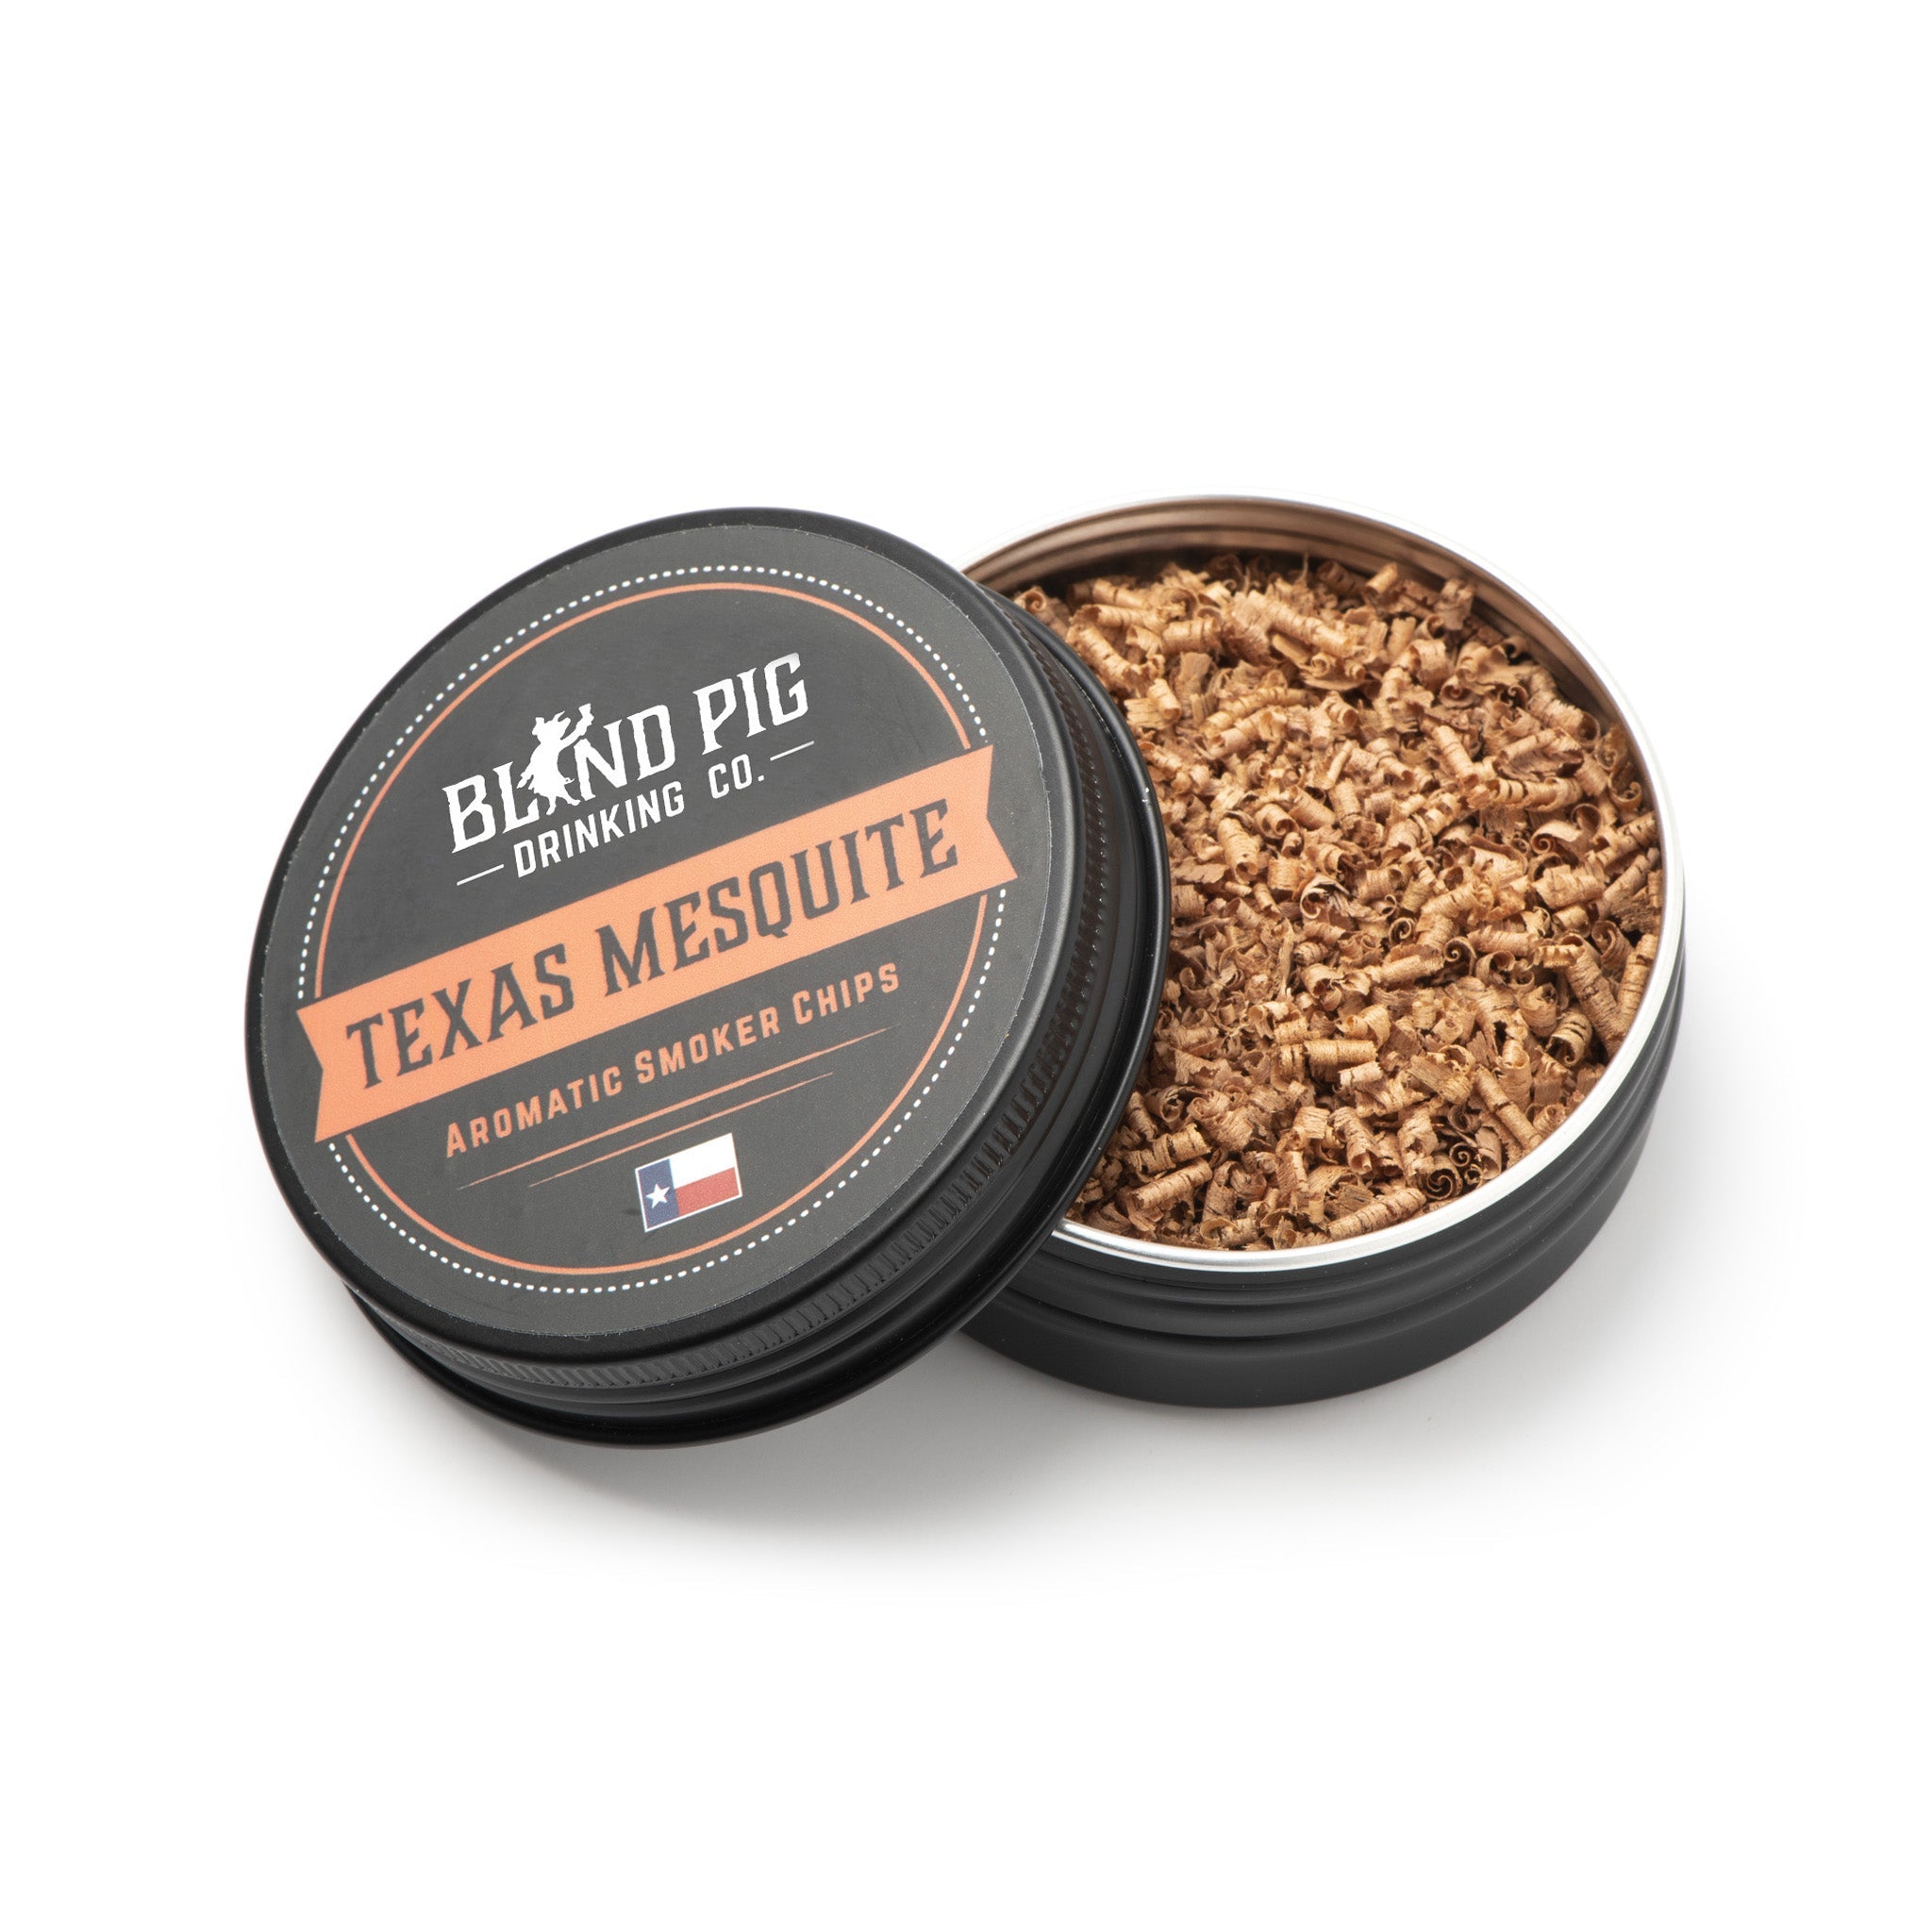 Texas Mesquite Aromatic Smoker Chips - Blind Pig Drinking Co.